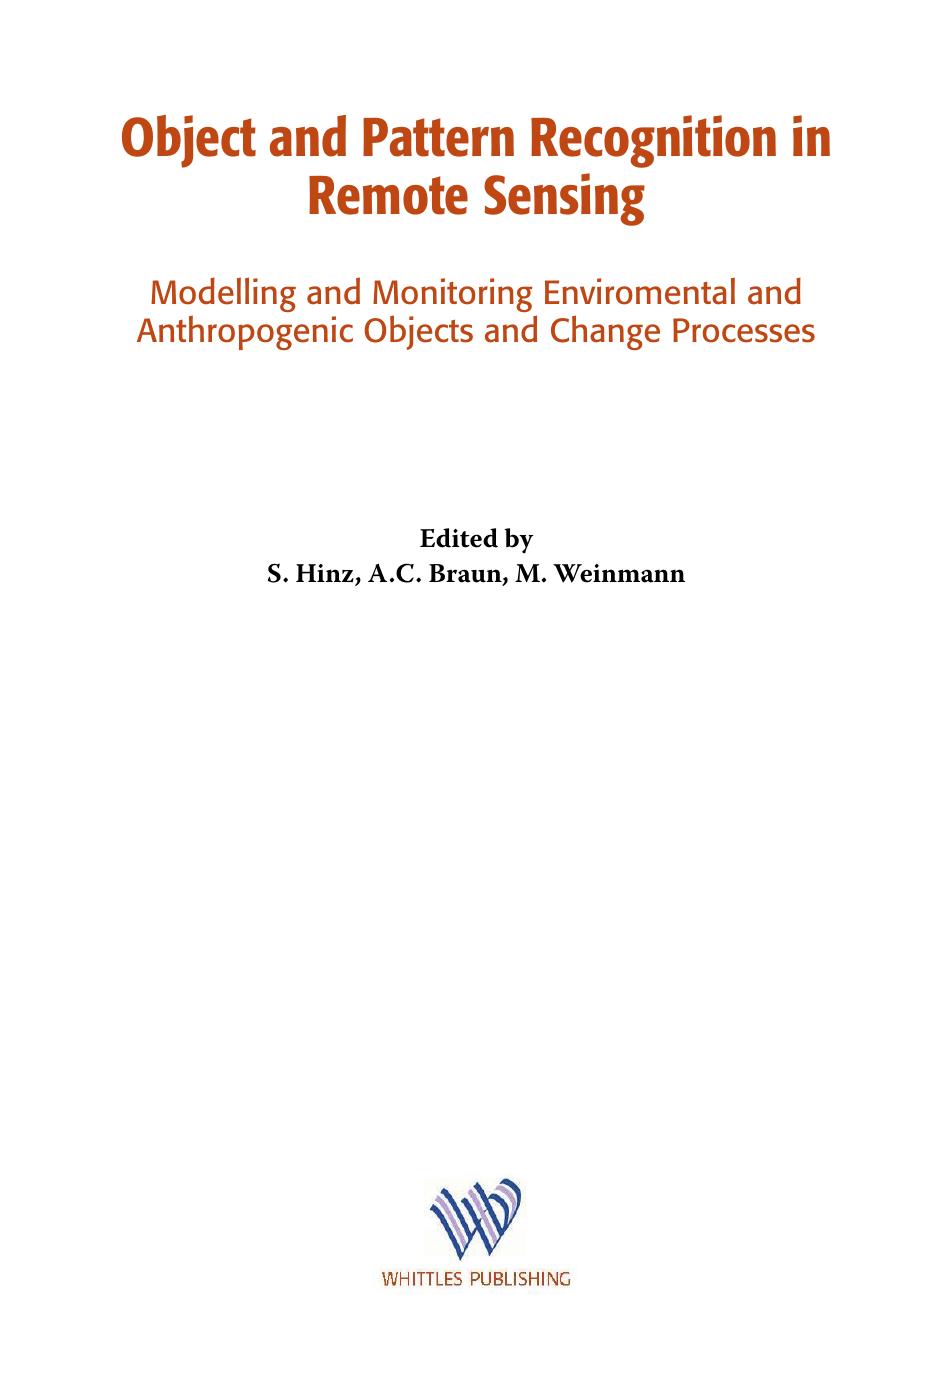 Object and Pattern Recognition in Remote Sensing: Modelling and Monitoring Environmental and Anthropogenic Objects and Change Processes by Stefan Hinz; Andreas Braun; Professor Martin Weinmann